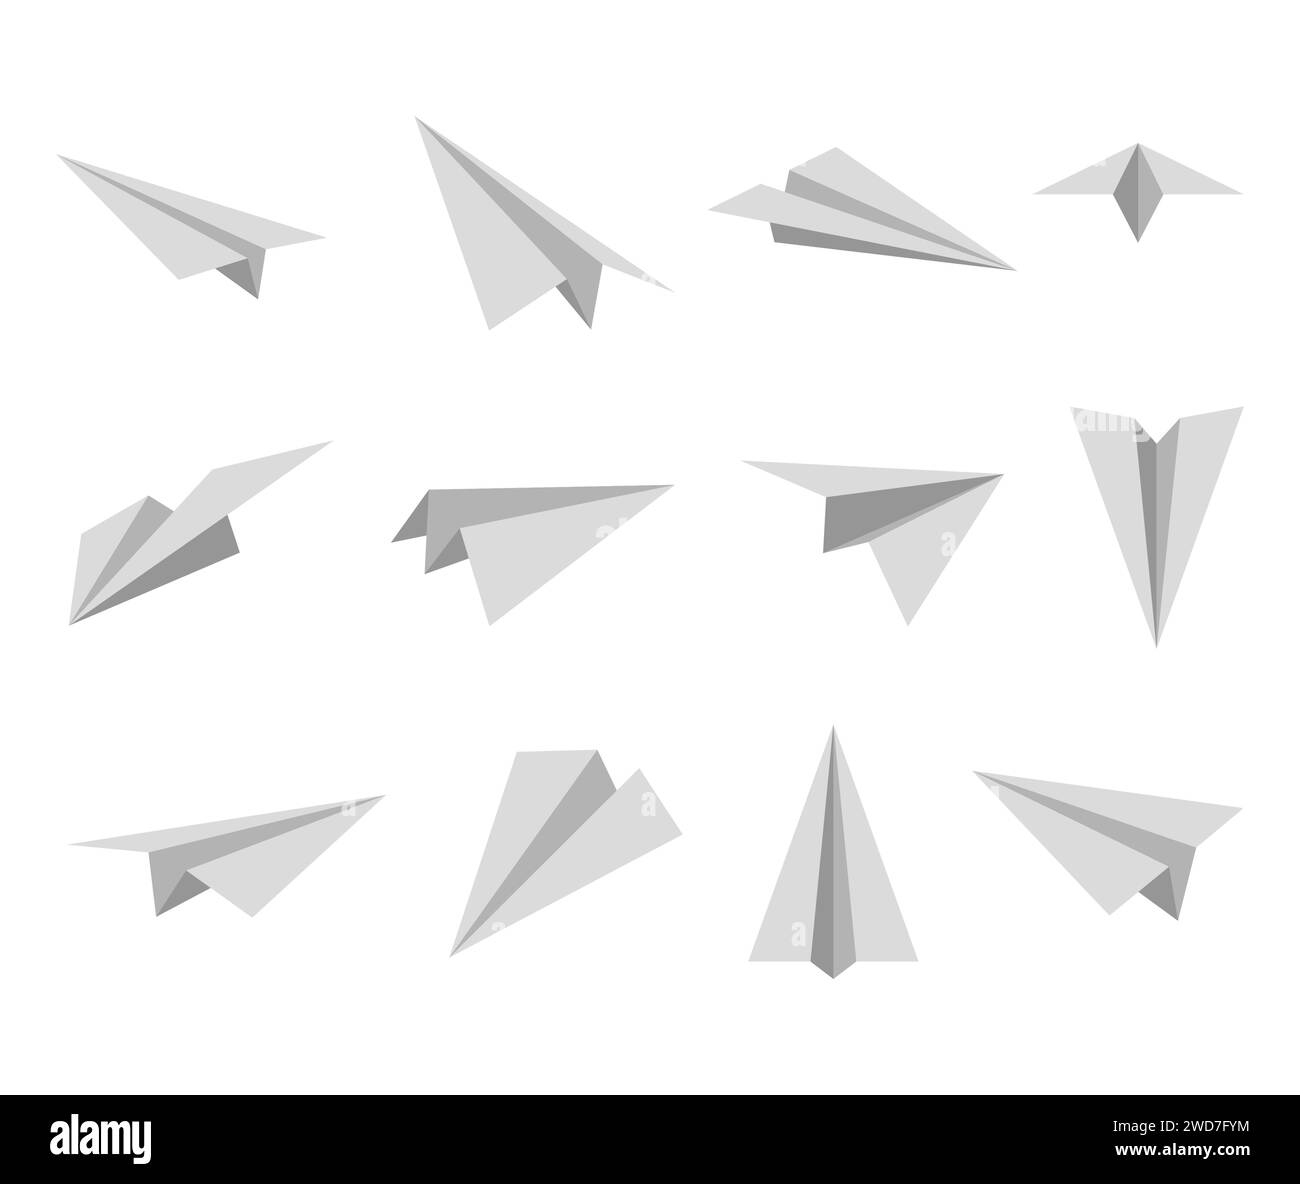 Set simple paper planes icon. White origami paper airplanes from different angles. Handmade aircraft on white background. Vector illustration. Stock Vector